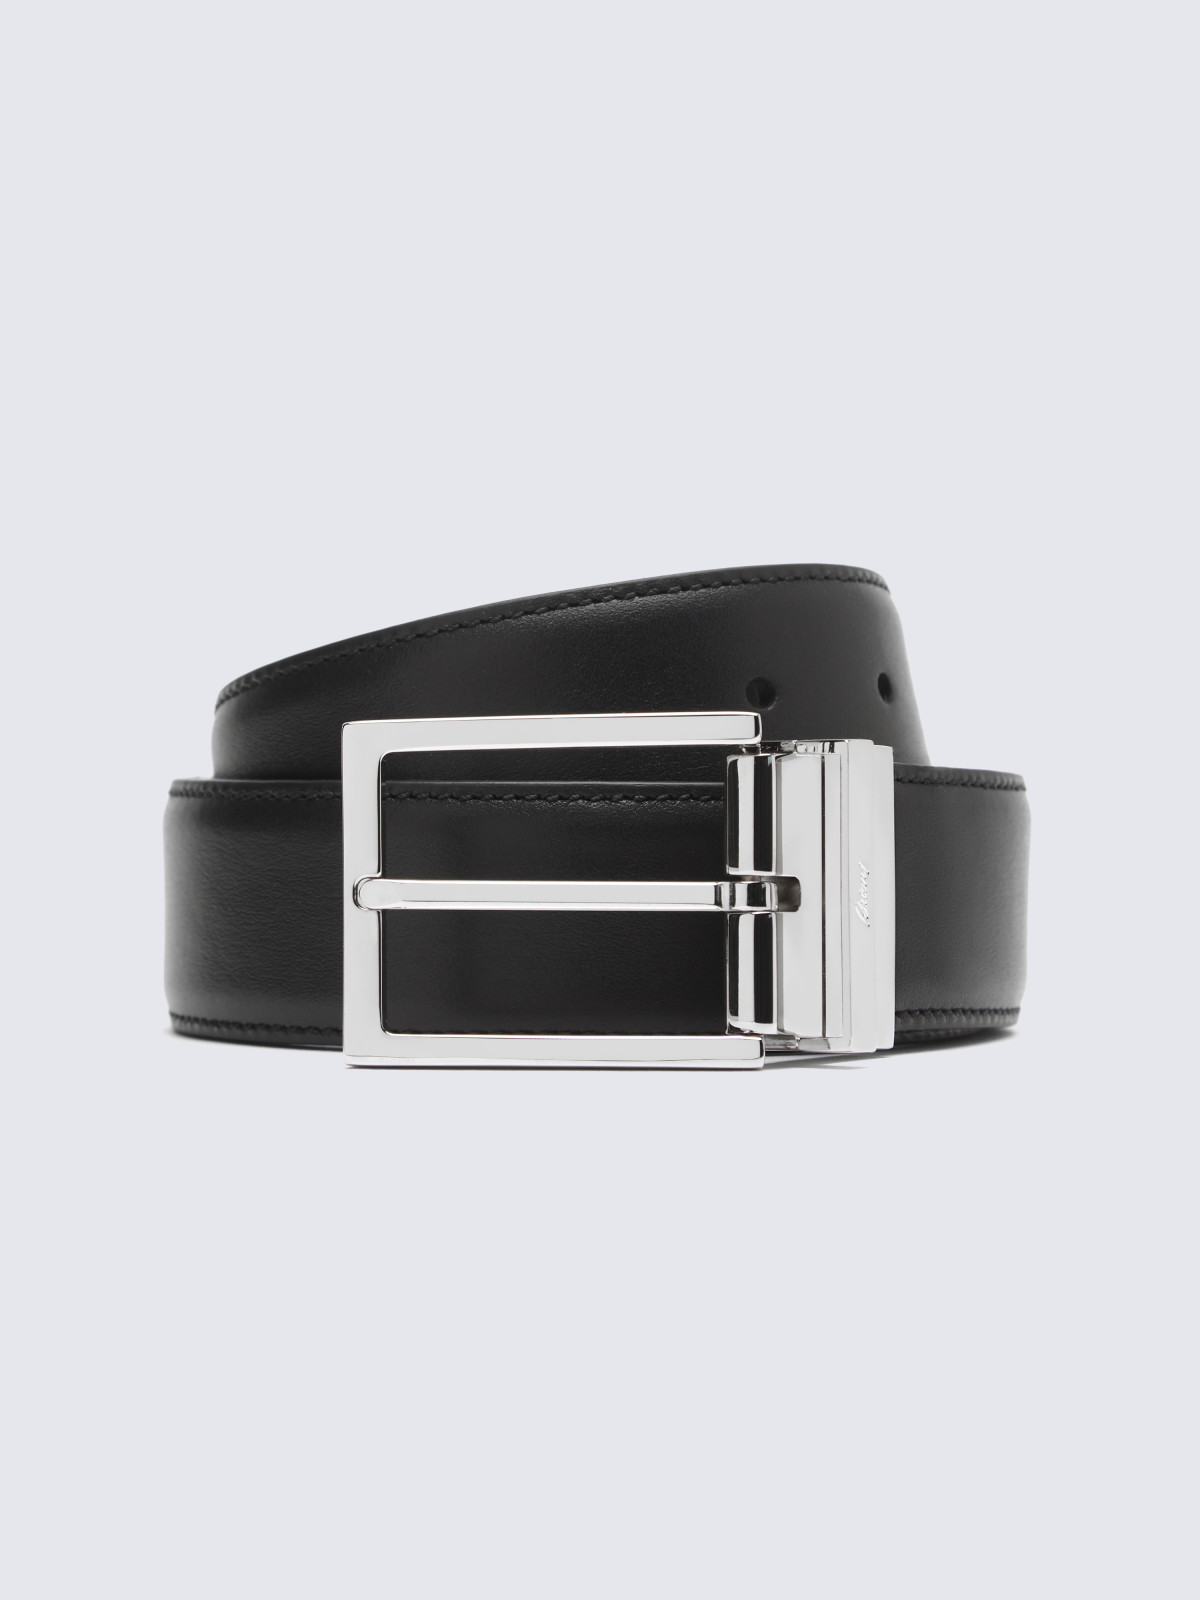 Black and navy blue calf leather adjustable and reversible belt ...